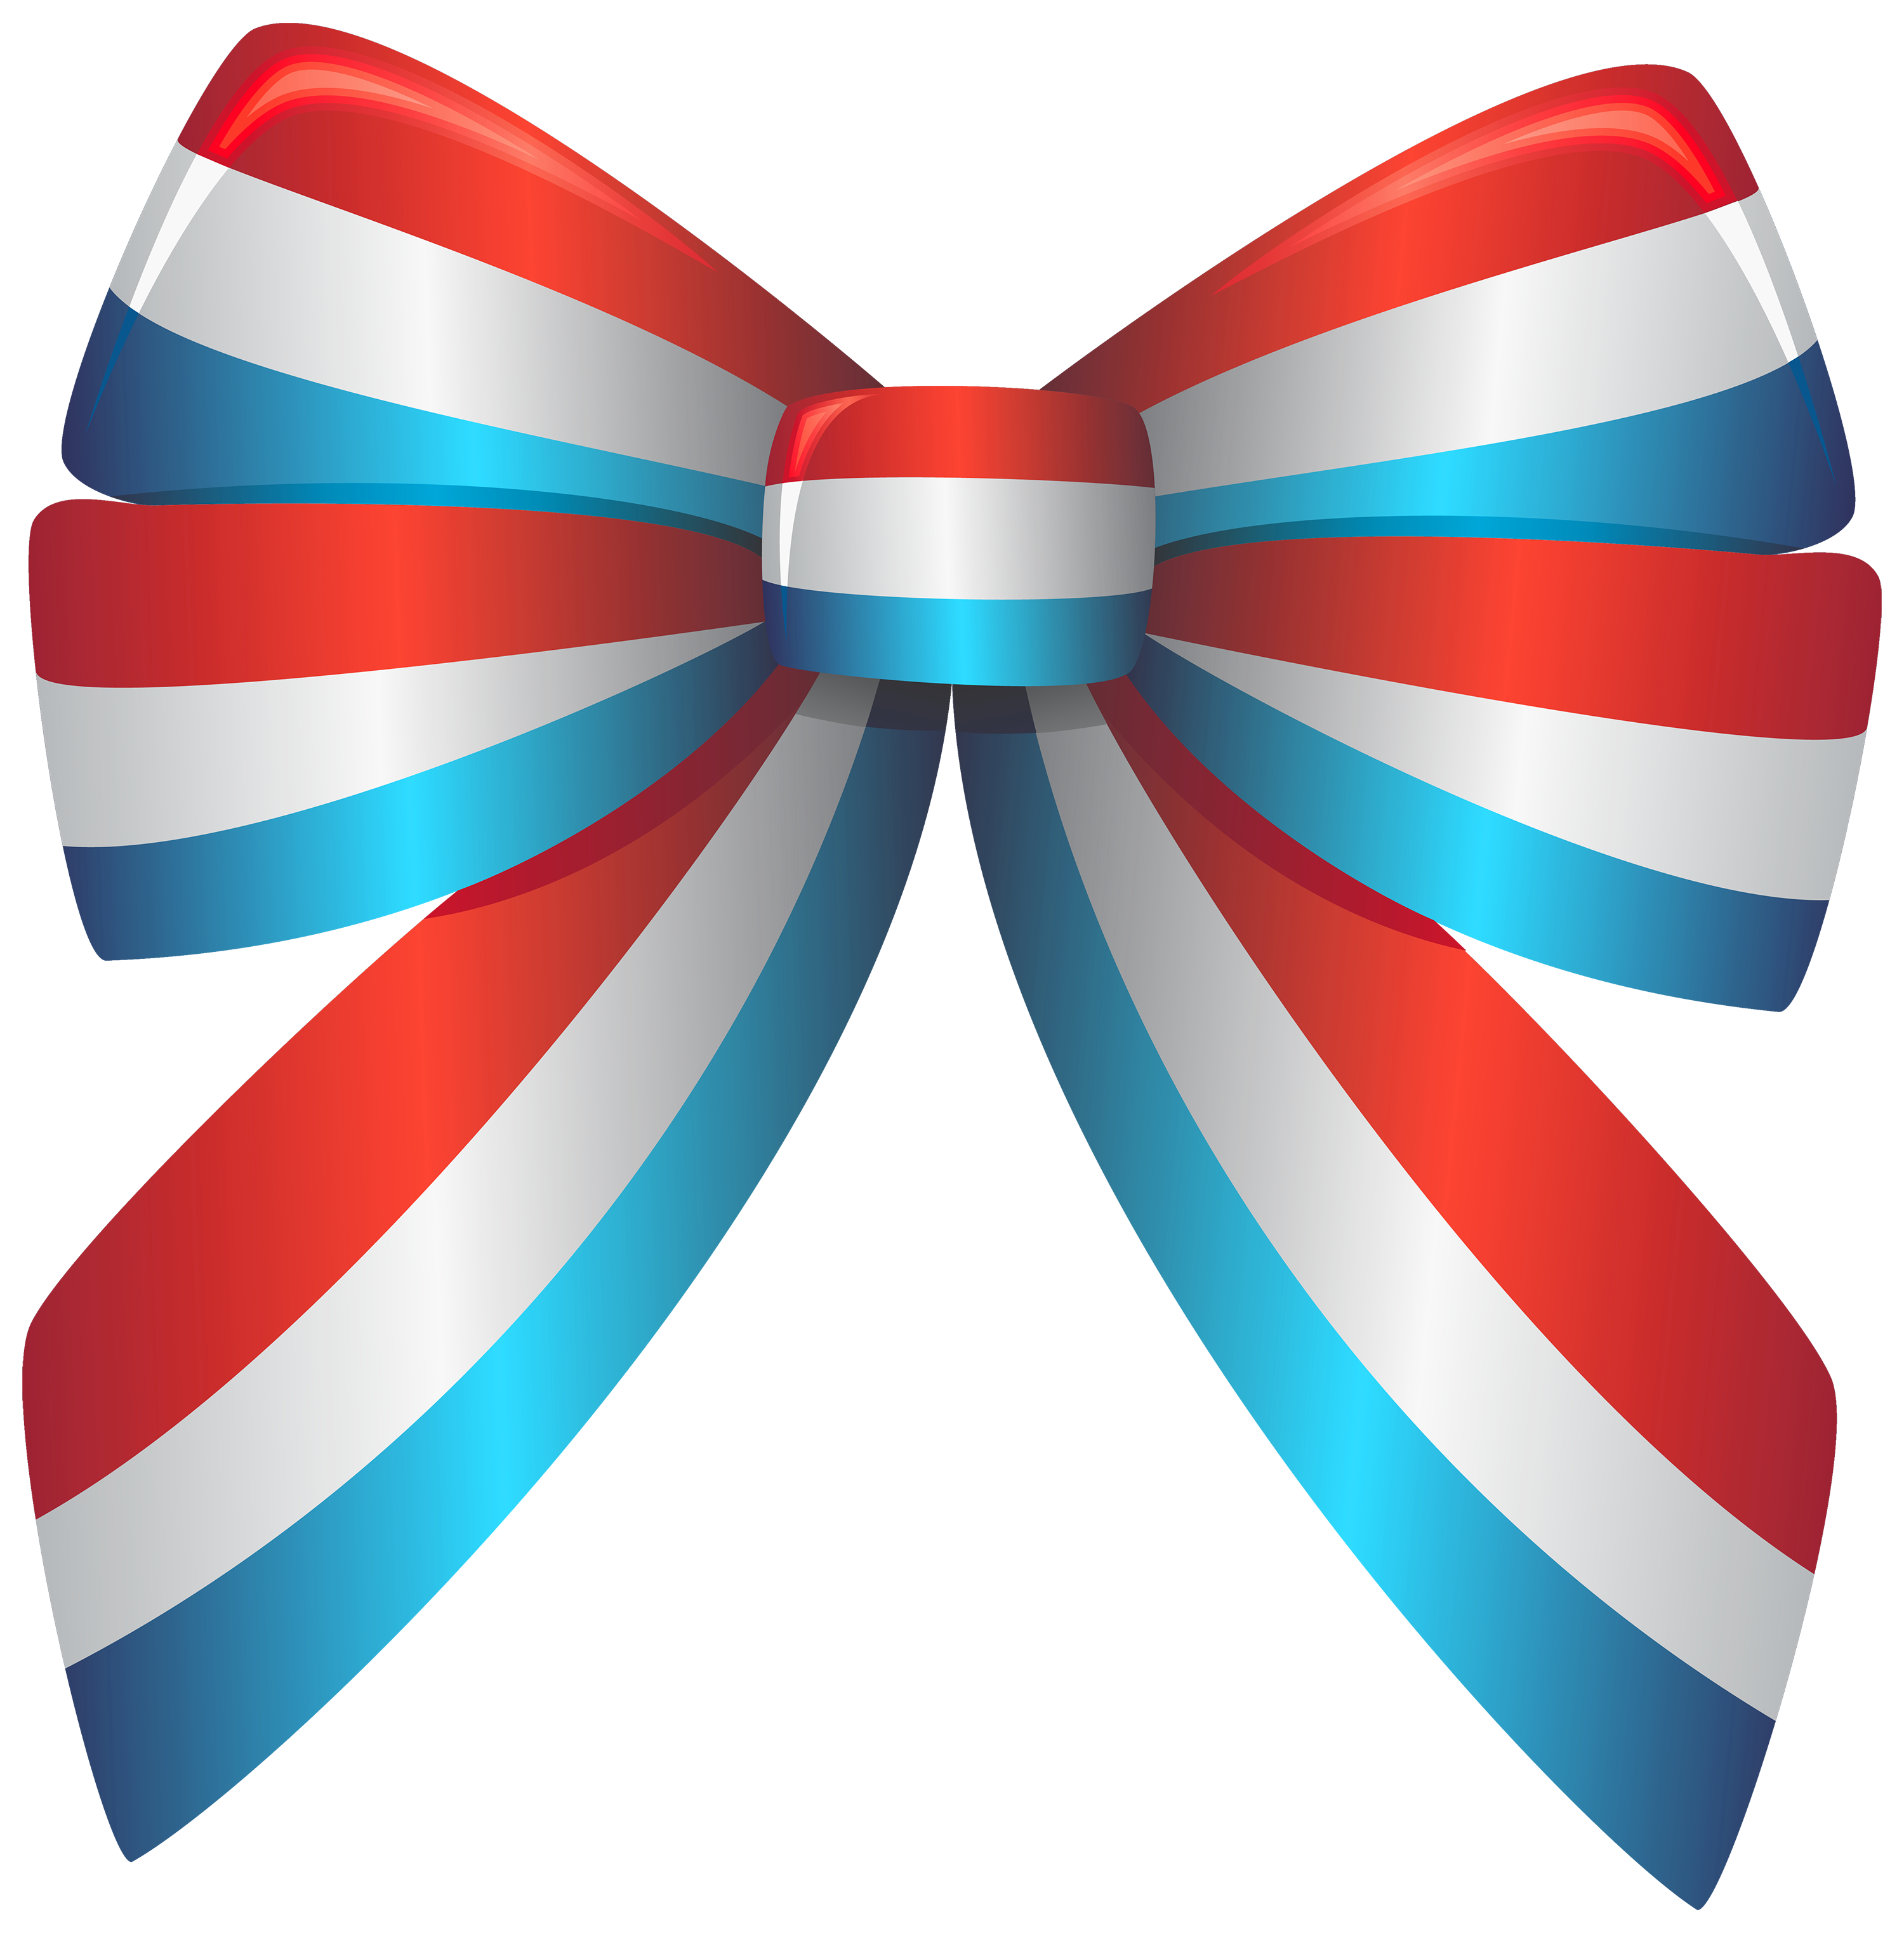 Red White and Blue Ribbon PNG Clipart - Best WEB Clipart